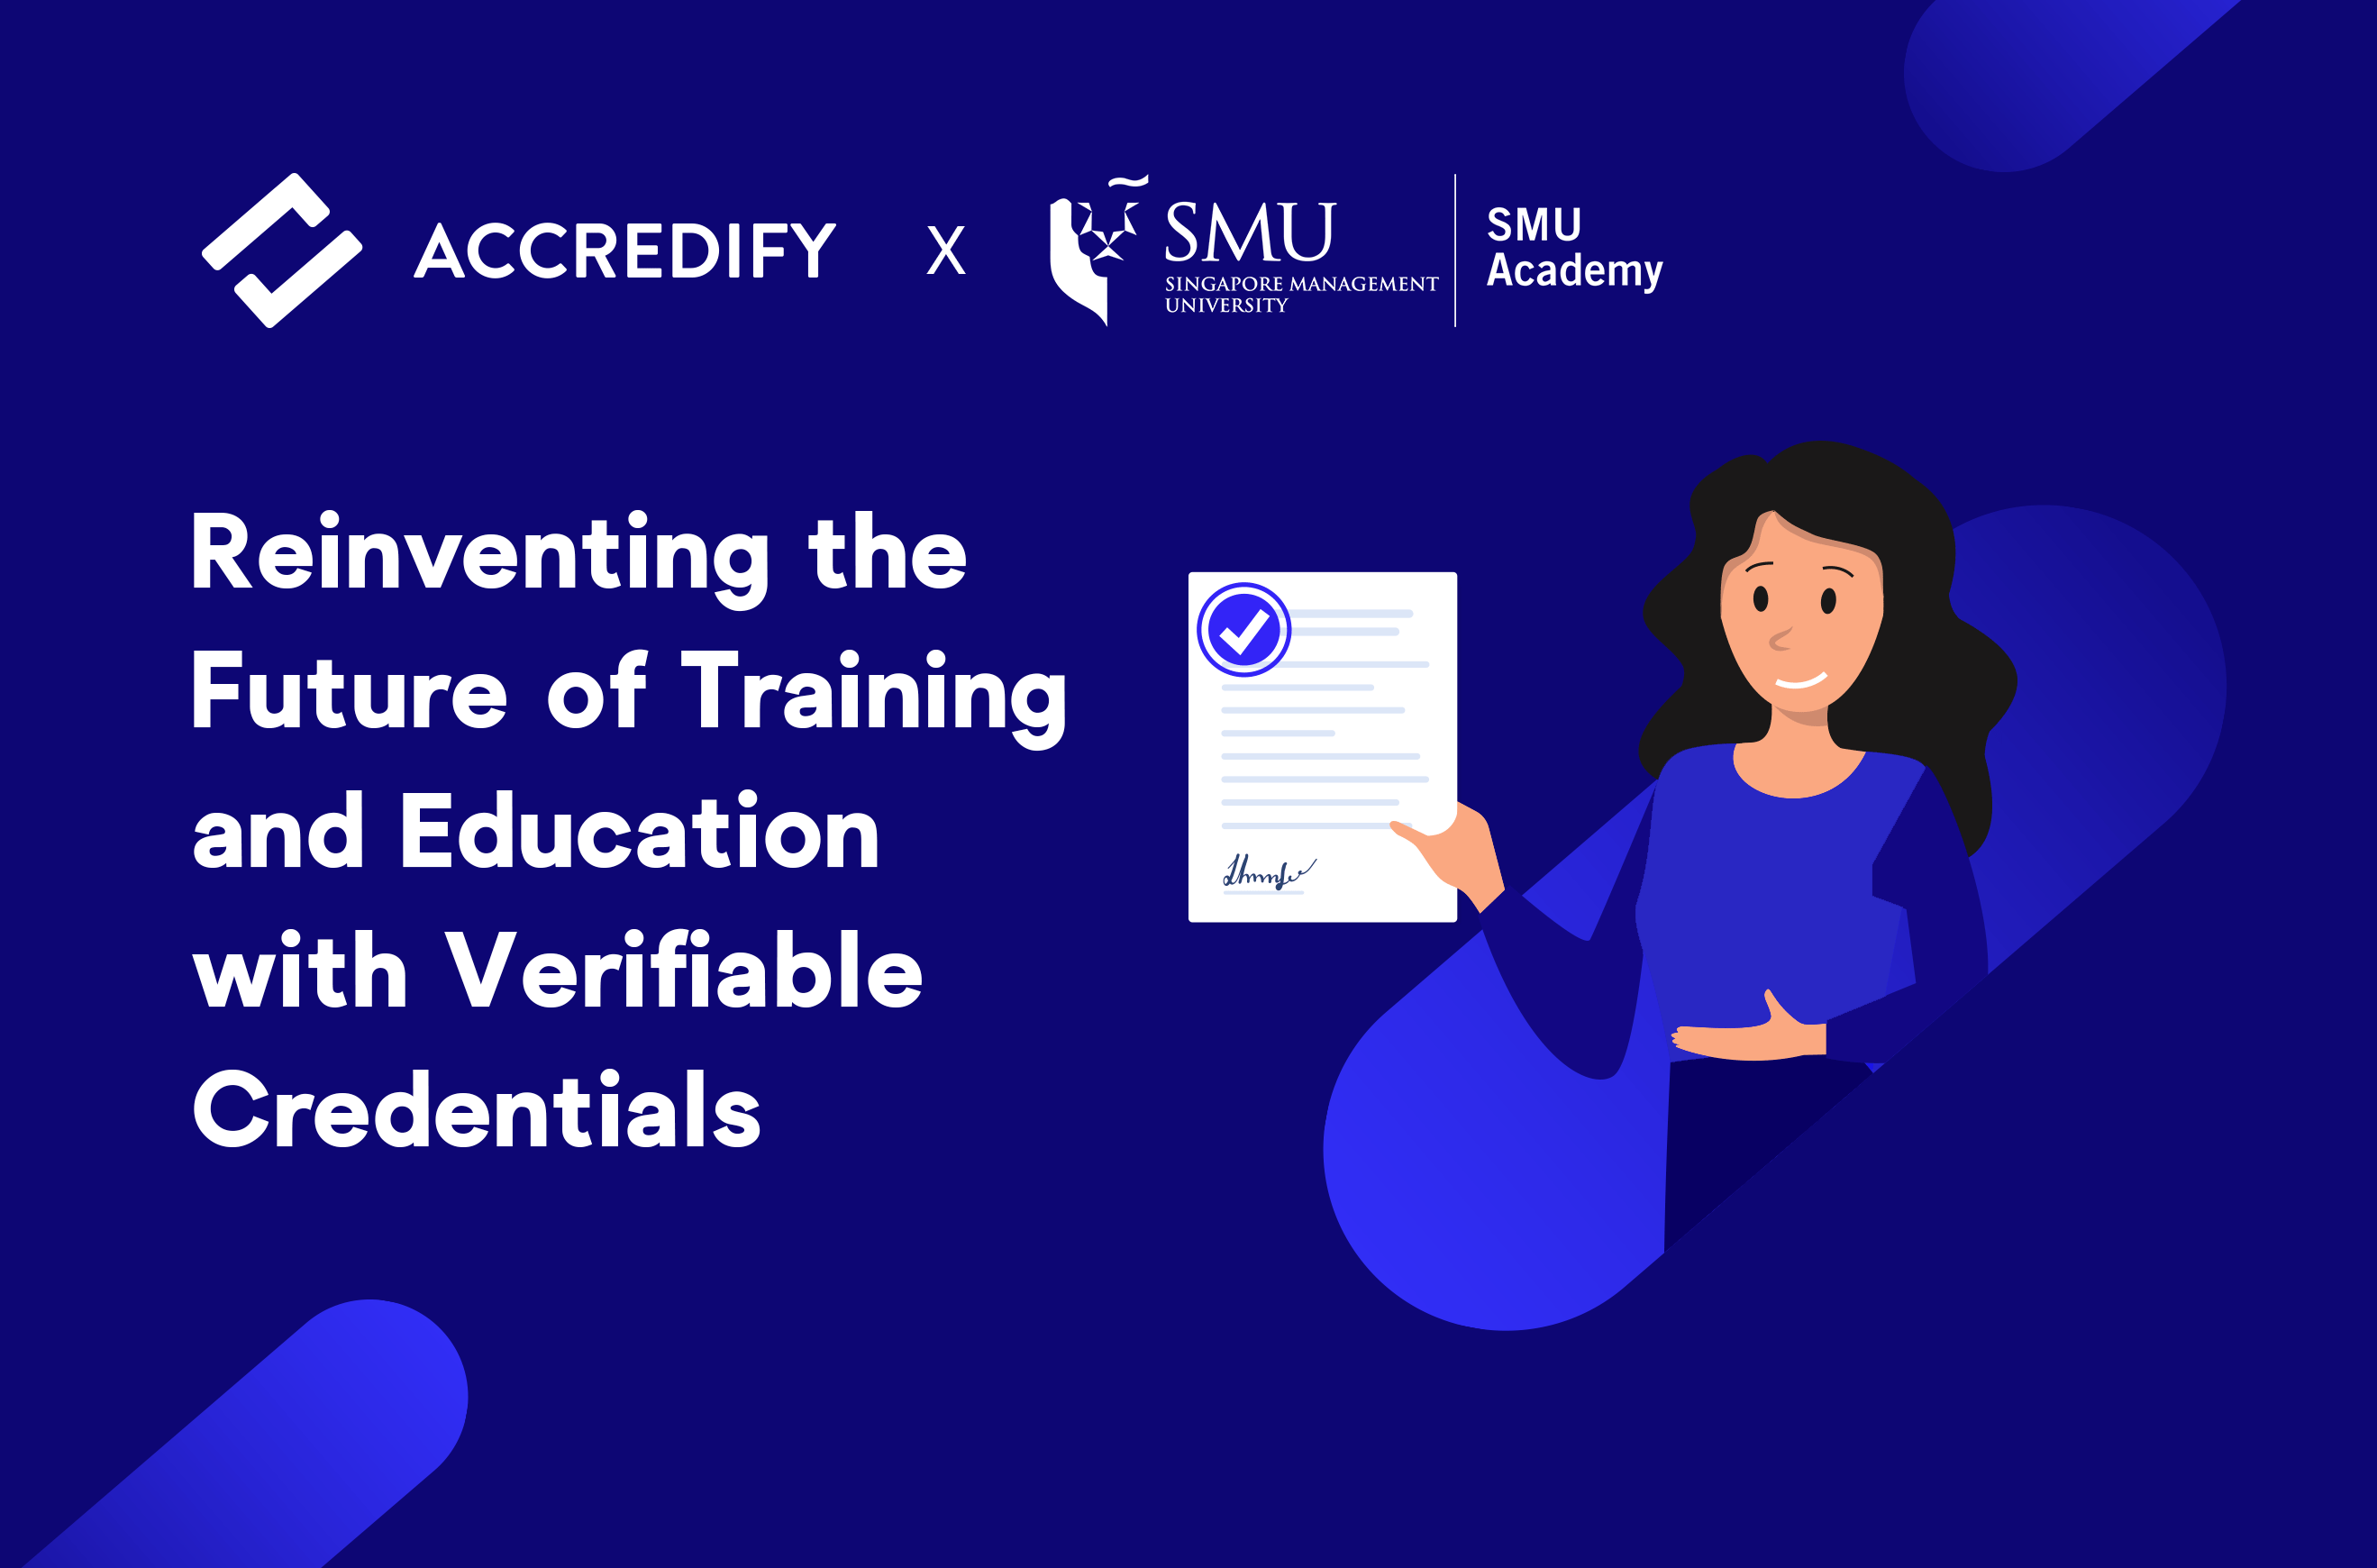 Accredify x SMU Academy: Reinventing the Future of Training and Education with Verifiable Credentials